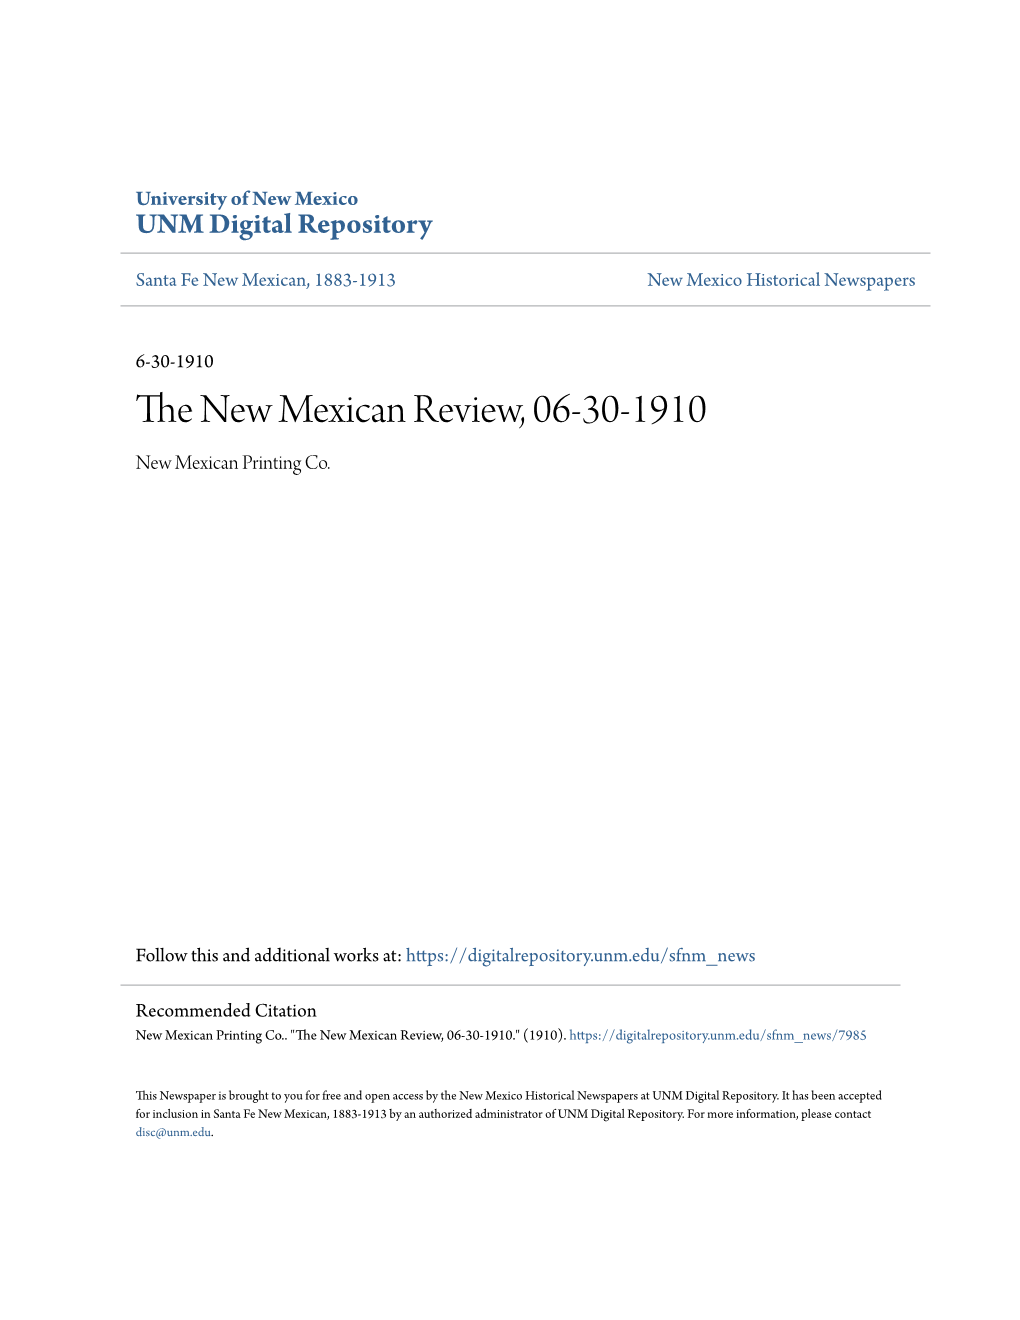 The New Mexican Review, 06-30-1910